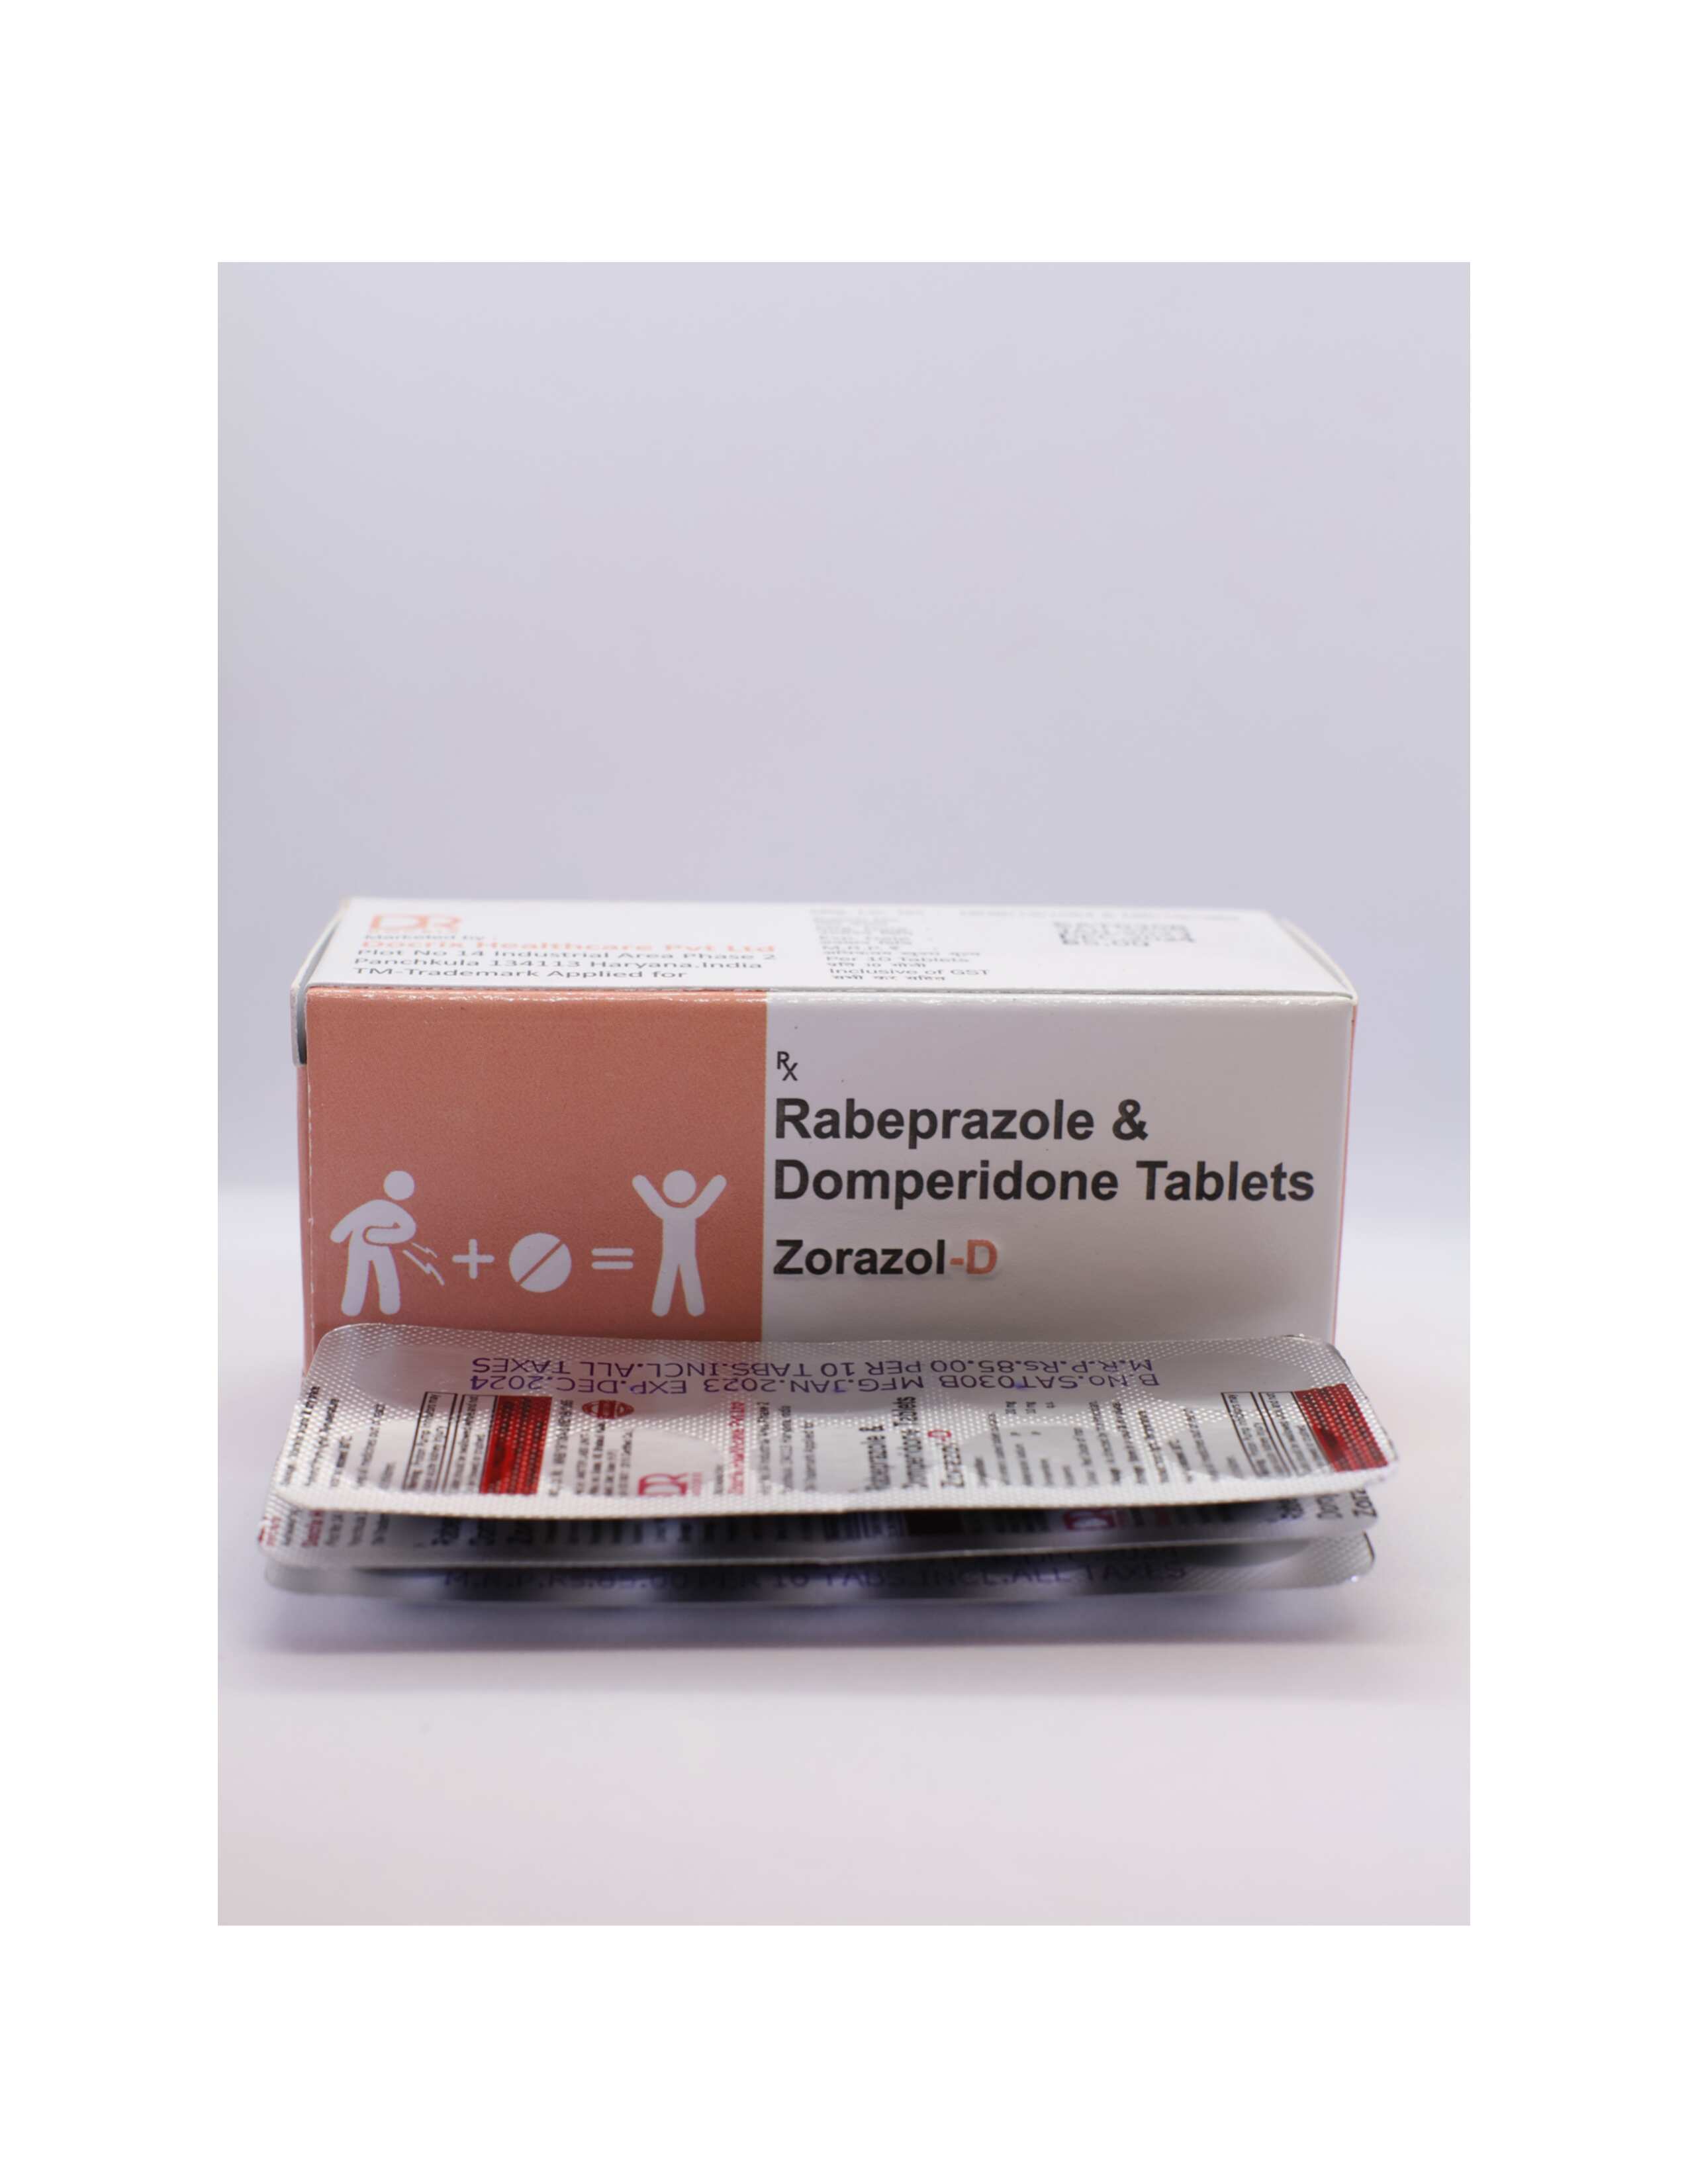 Product Name: Zorazol D, Compositions of Zorazol D are Rabeprazole Domperidone Tablets - Docrix Healthcare